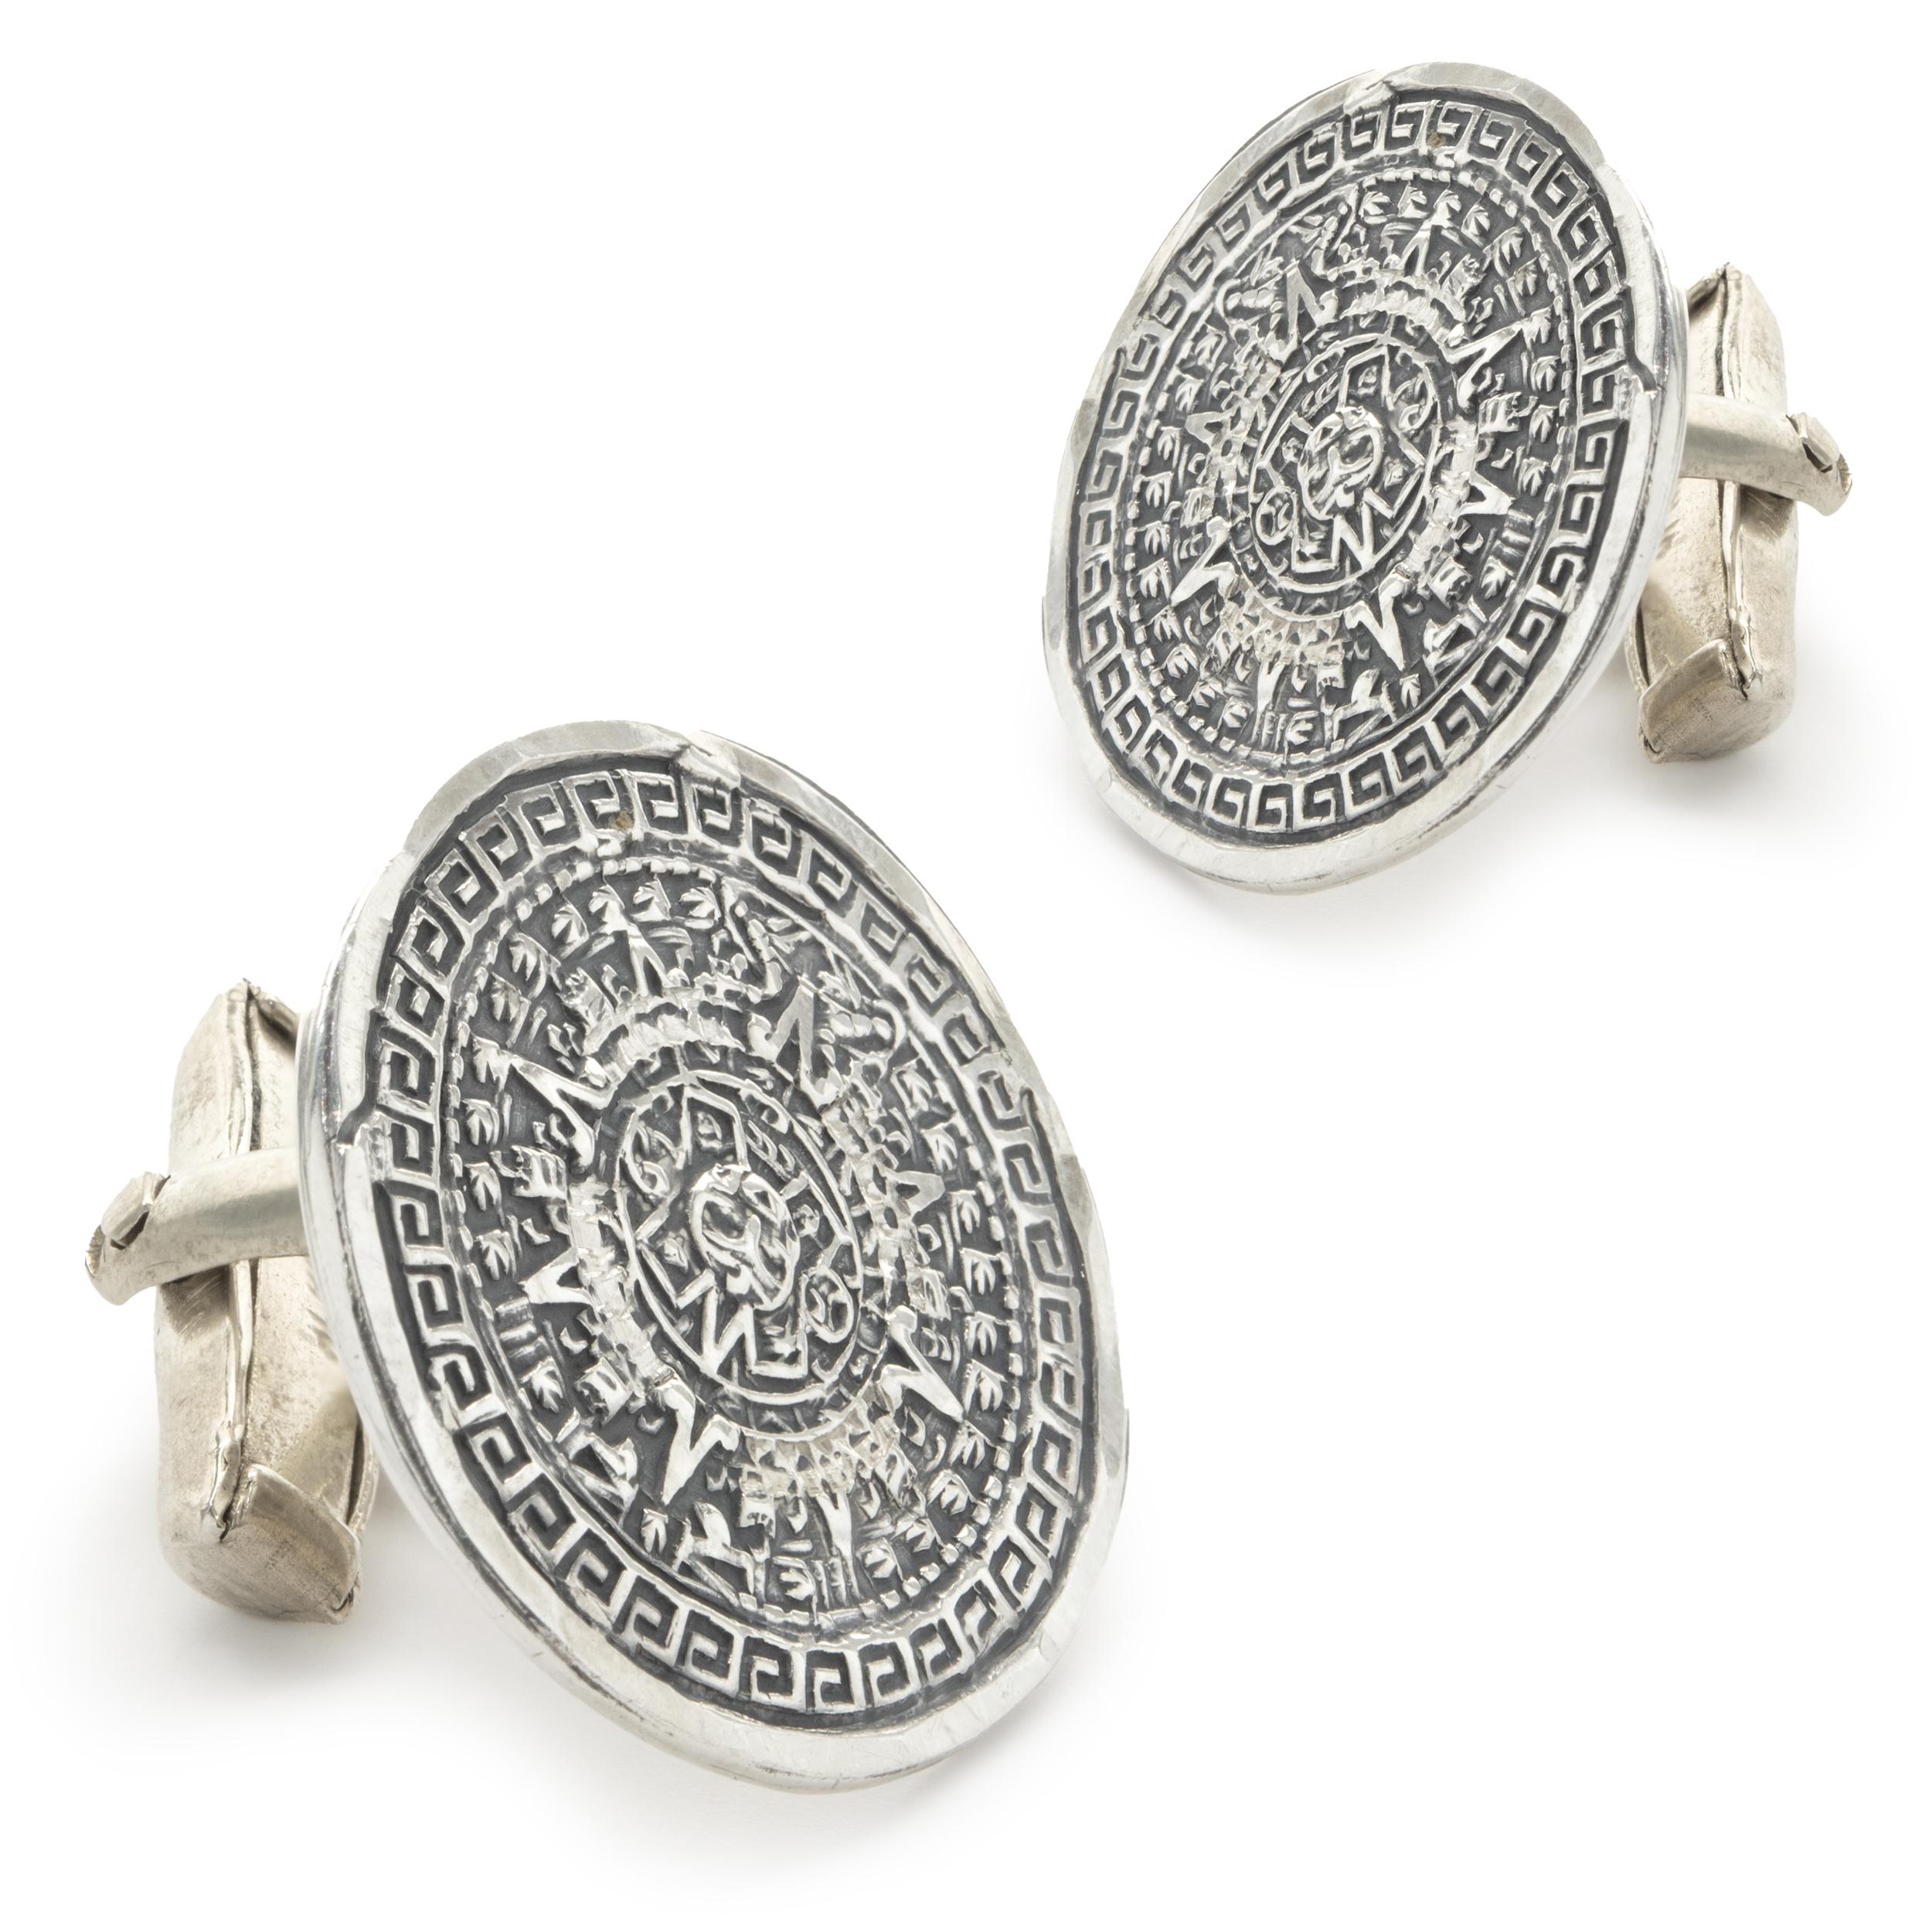 Material: sterling silver
Dimensions: cufflinks measure 23.50mm 
Weight: 12.76 grams